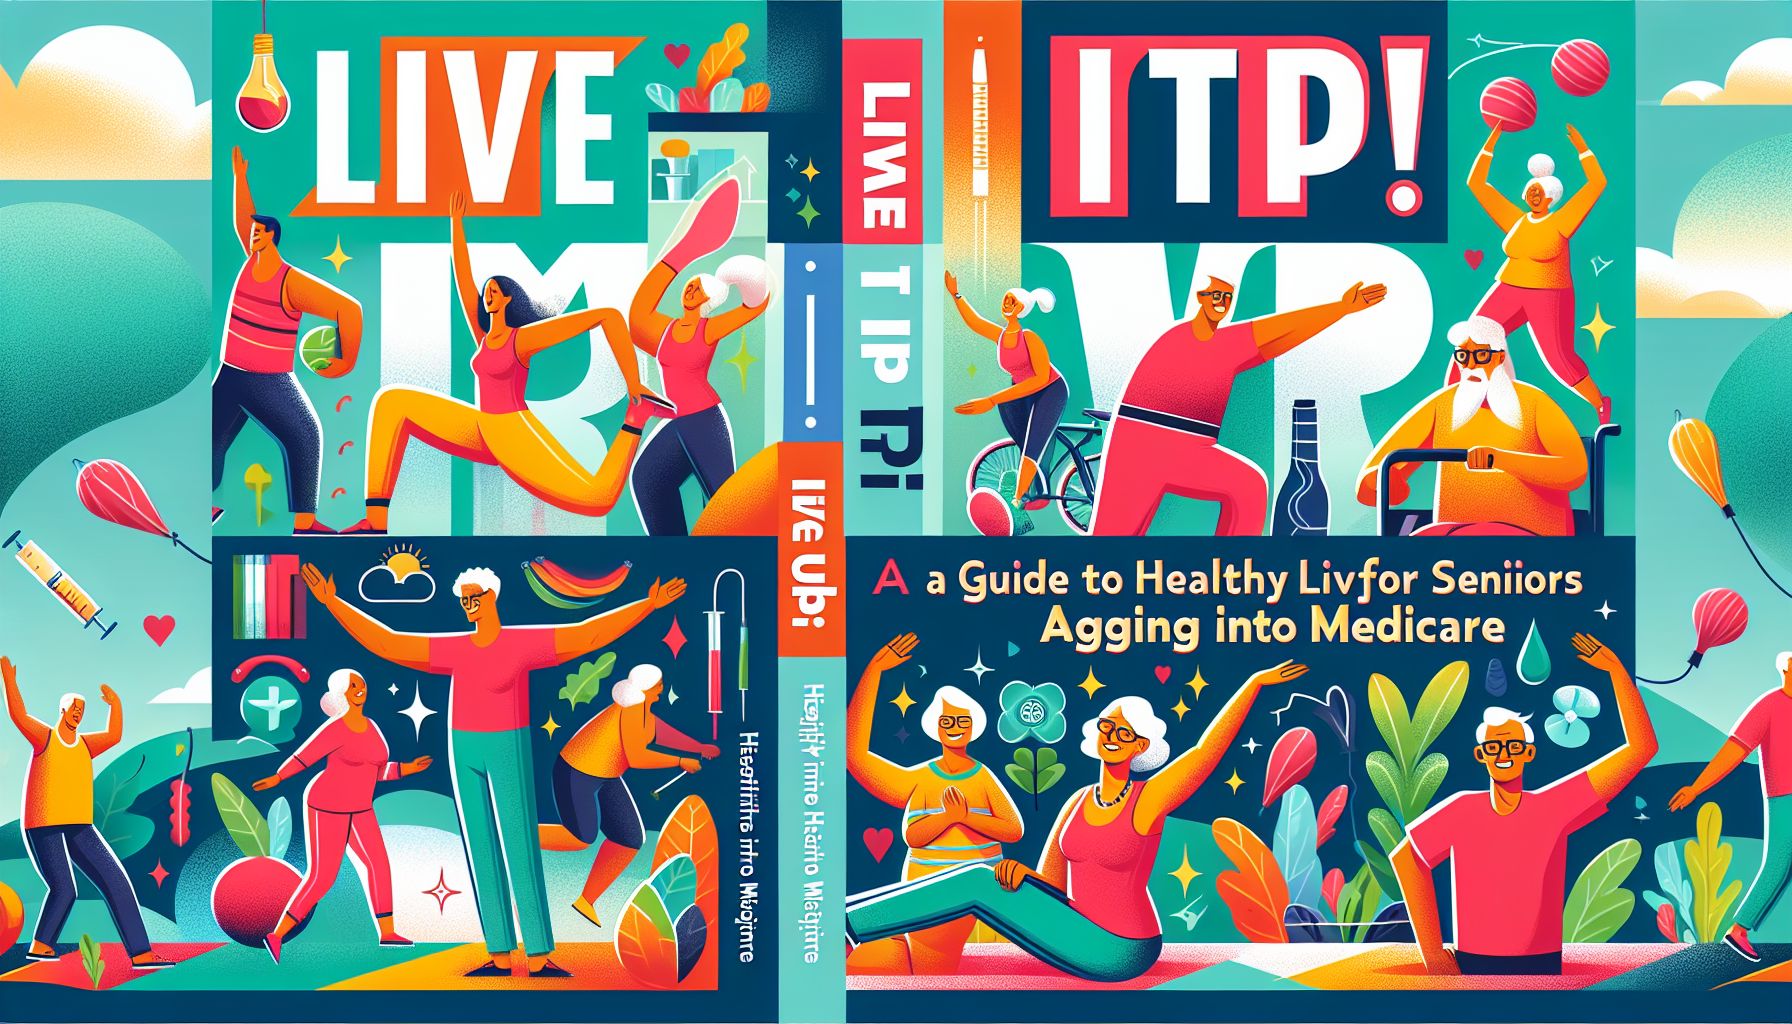 Live it Up! A Guide to Healthy Living for Seniors Aging into Medicare